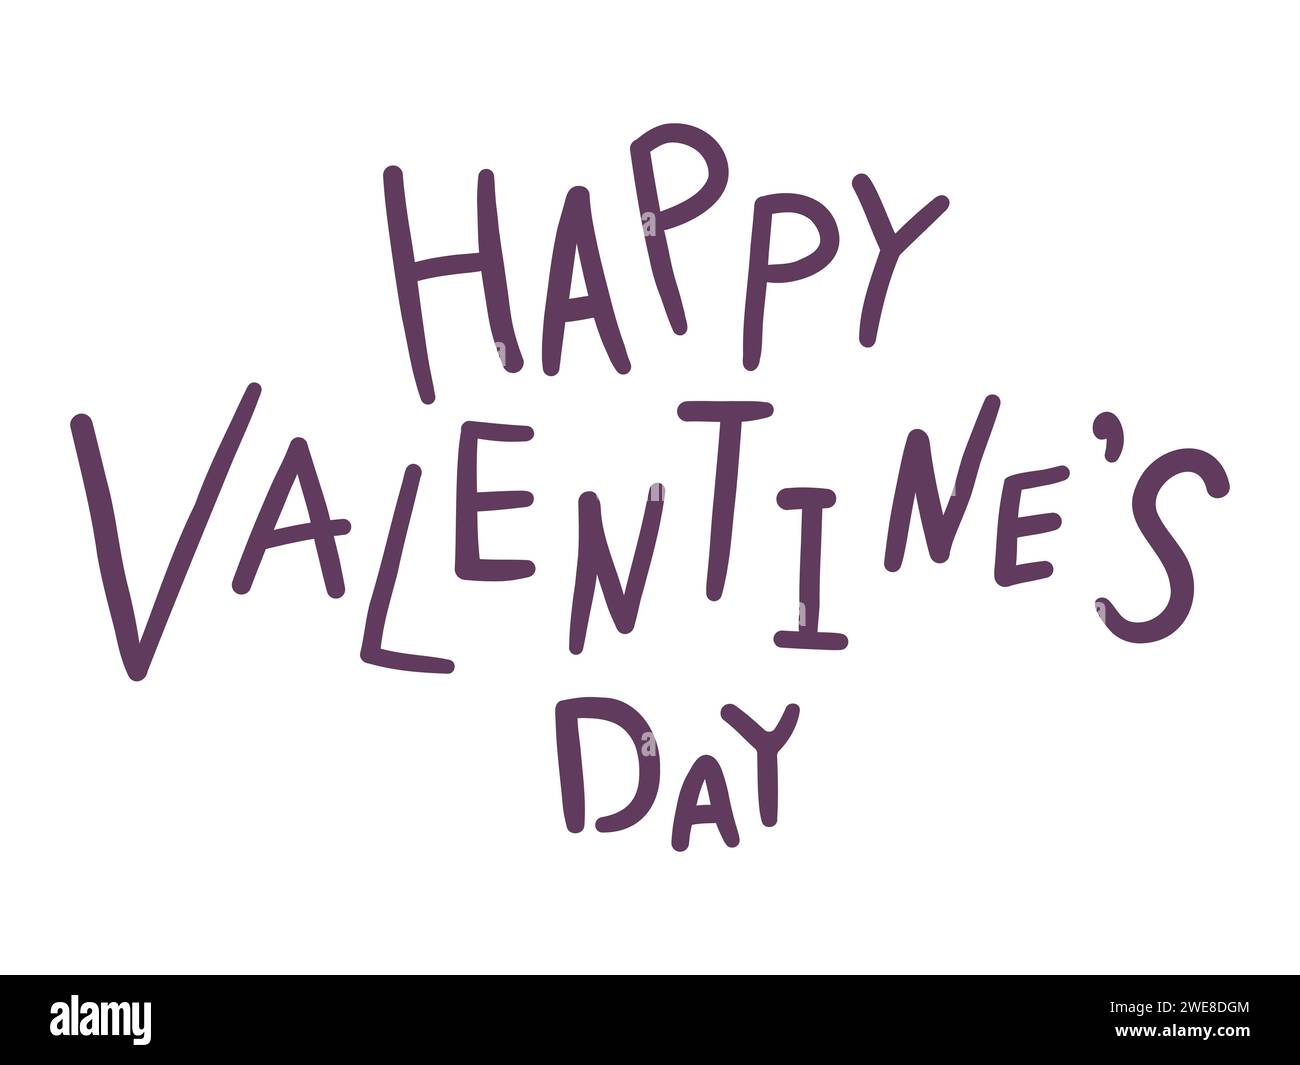 Happy Valentines Day hand drawn lettering. Vector Stock Vector